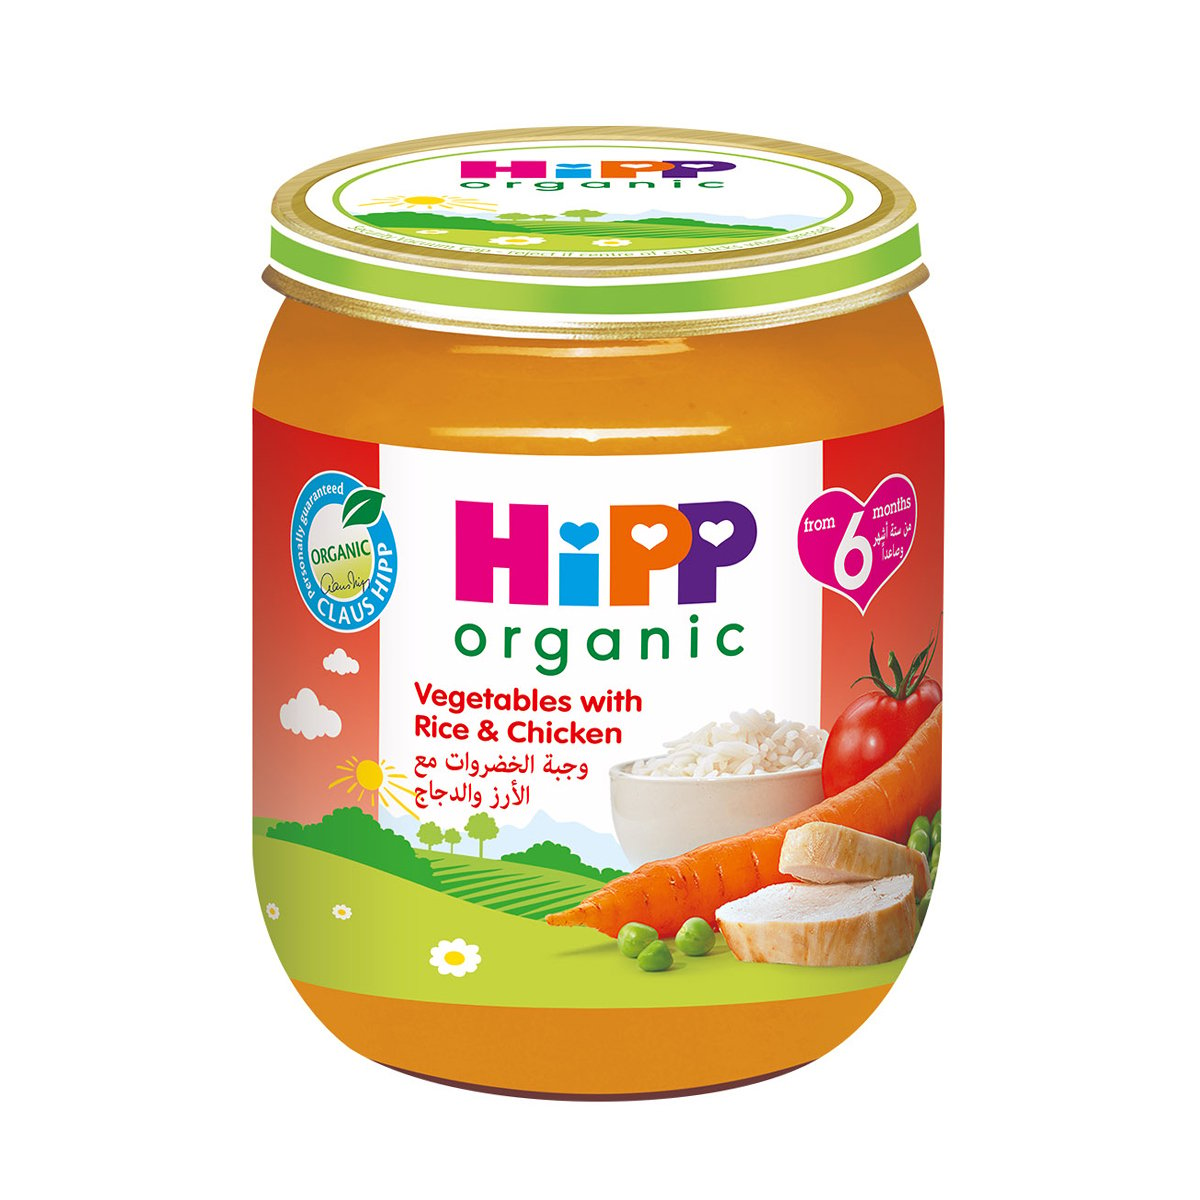 Hipp Organic Vegetables With Rice & Chicken From 6 Months 125 g